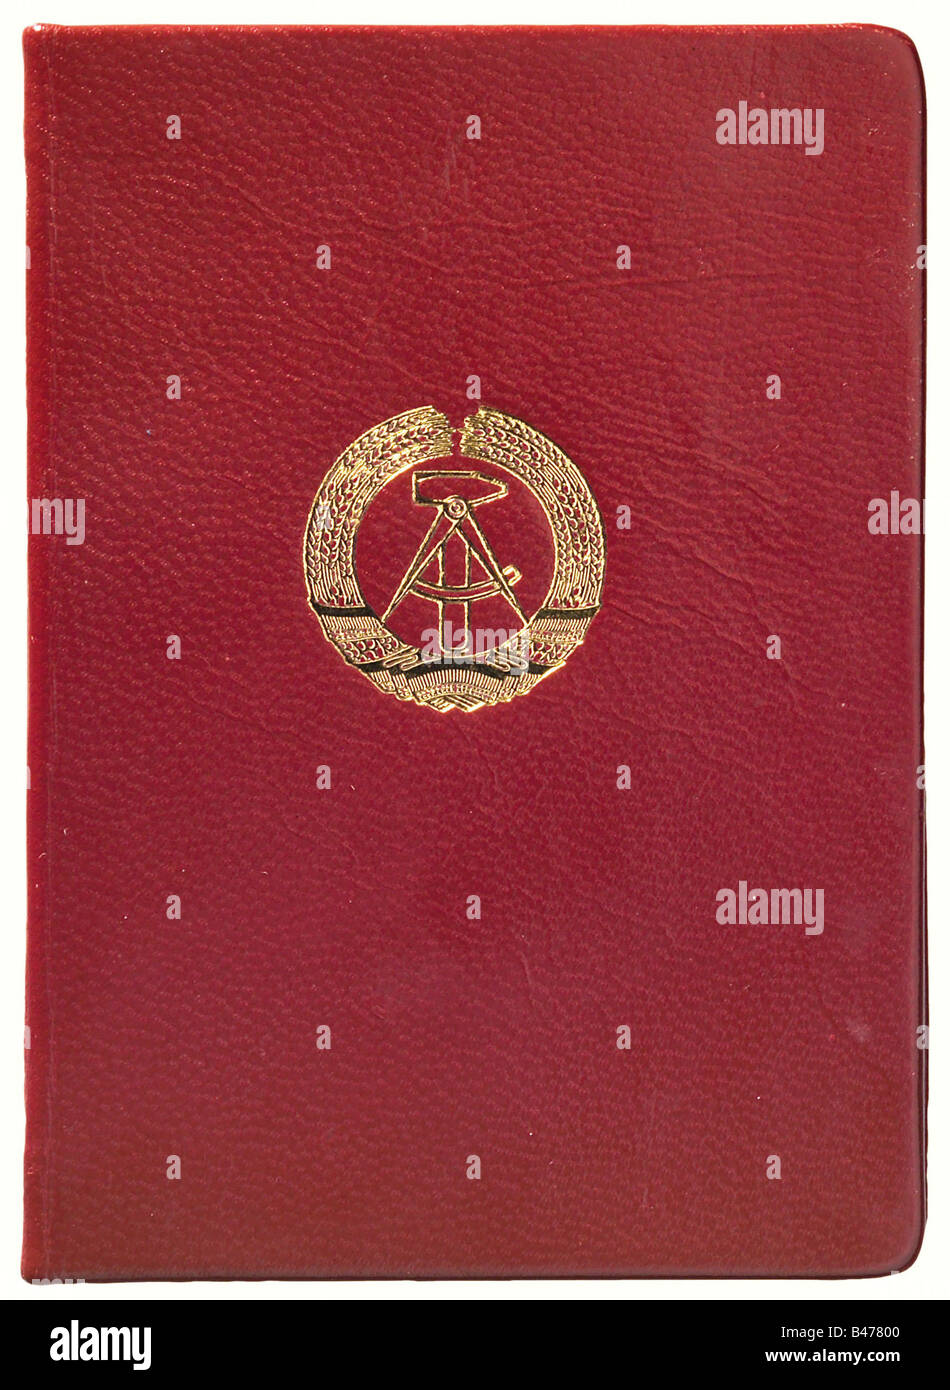 Dr. Günter Mittag (1926 - 1994)., A State Councillor's Pass (Staatsratsausweis), 16th of June 1986. Pass, bound in red leather, with state coat of arms of the GDR stamped in gold on the front. Inside, signature of the Chairman of the State Council, Honecker, and signature of Mittag, as well as photo. Mittag was Deputy Chairman of the State Council of the GDR. historic, historical, 1980s, 20th century, GDR, East Germany, Eastern Germany, East-German, East German, object, objects, stills, clipping, cut out, cut-out, cut-outs, document, documents, Stock Photo